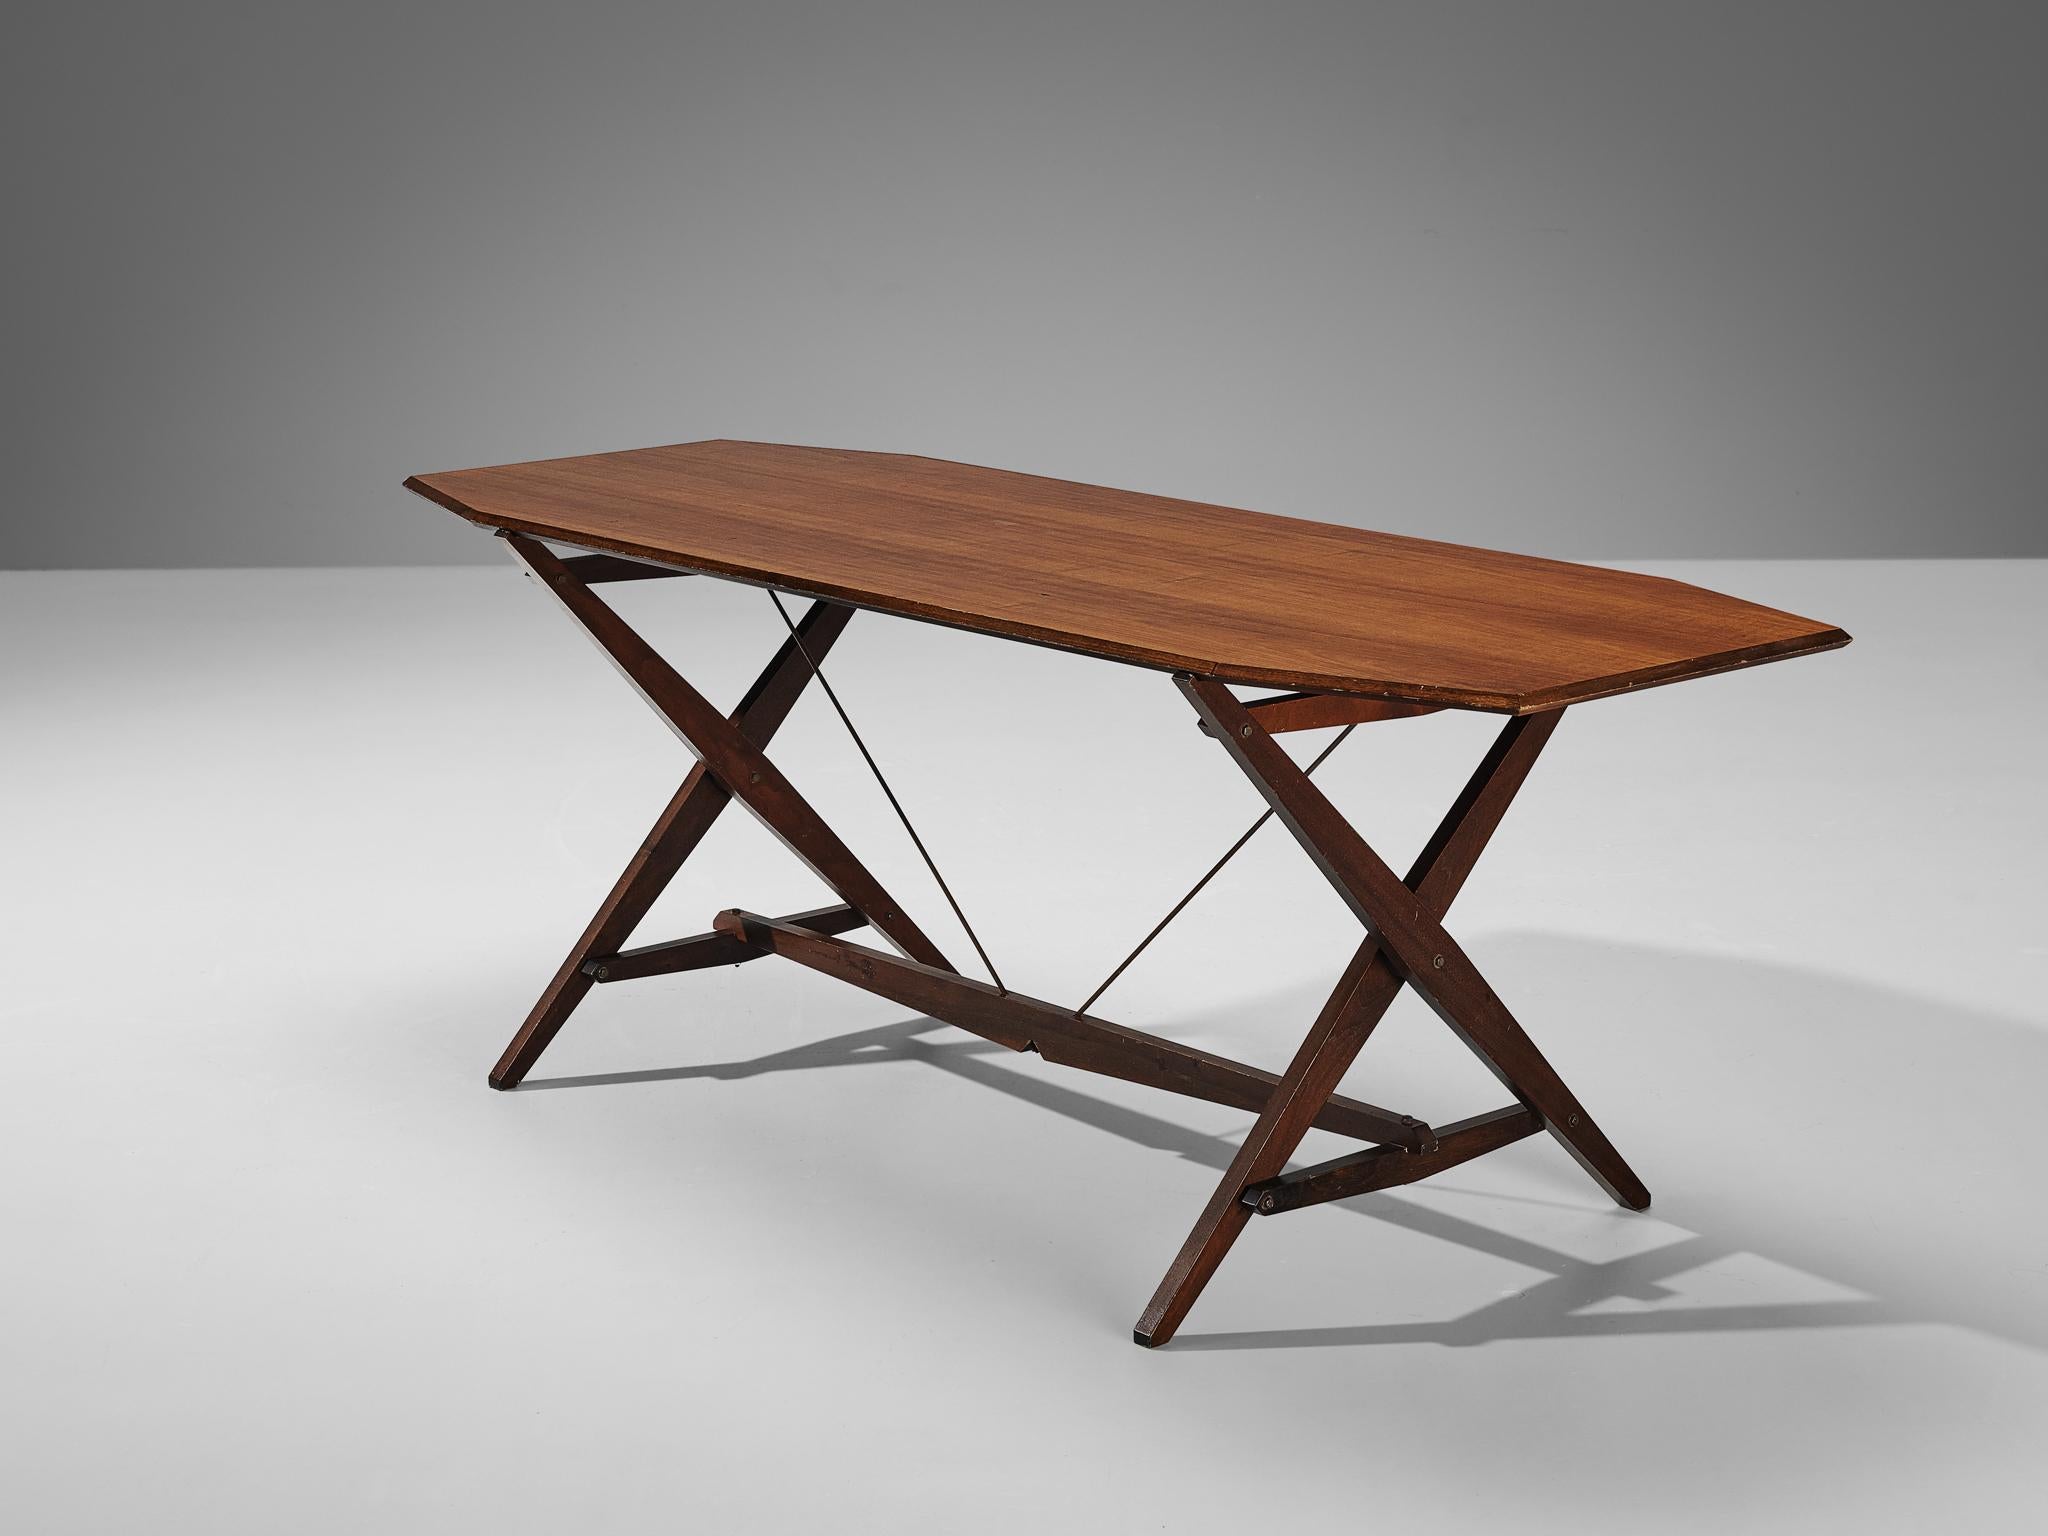 Franco Albini for Poggi, dining table, model TL2, walnut and iron, Italy, 1951.

The TL2 table by Franco Albini features a simplistic and sleek design. Executed in darkened walnut wood that features a rectangular tabletop with beveled edges. The